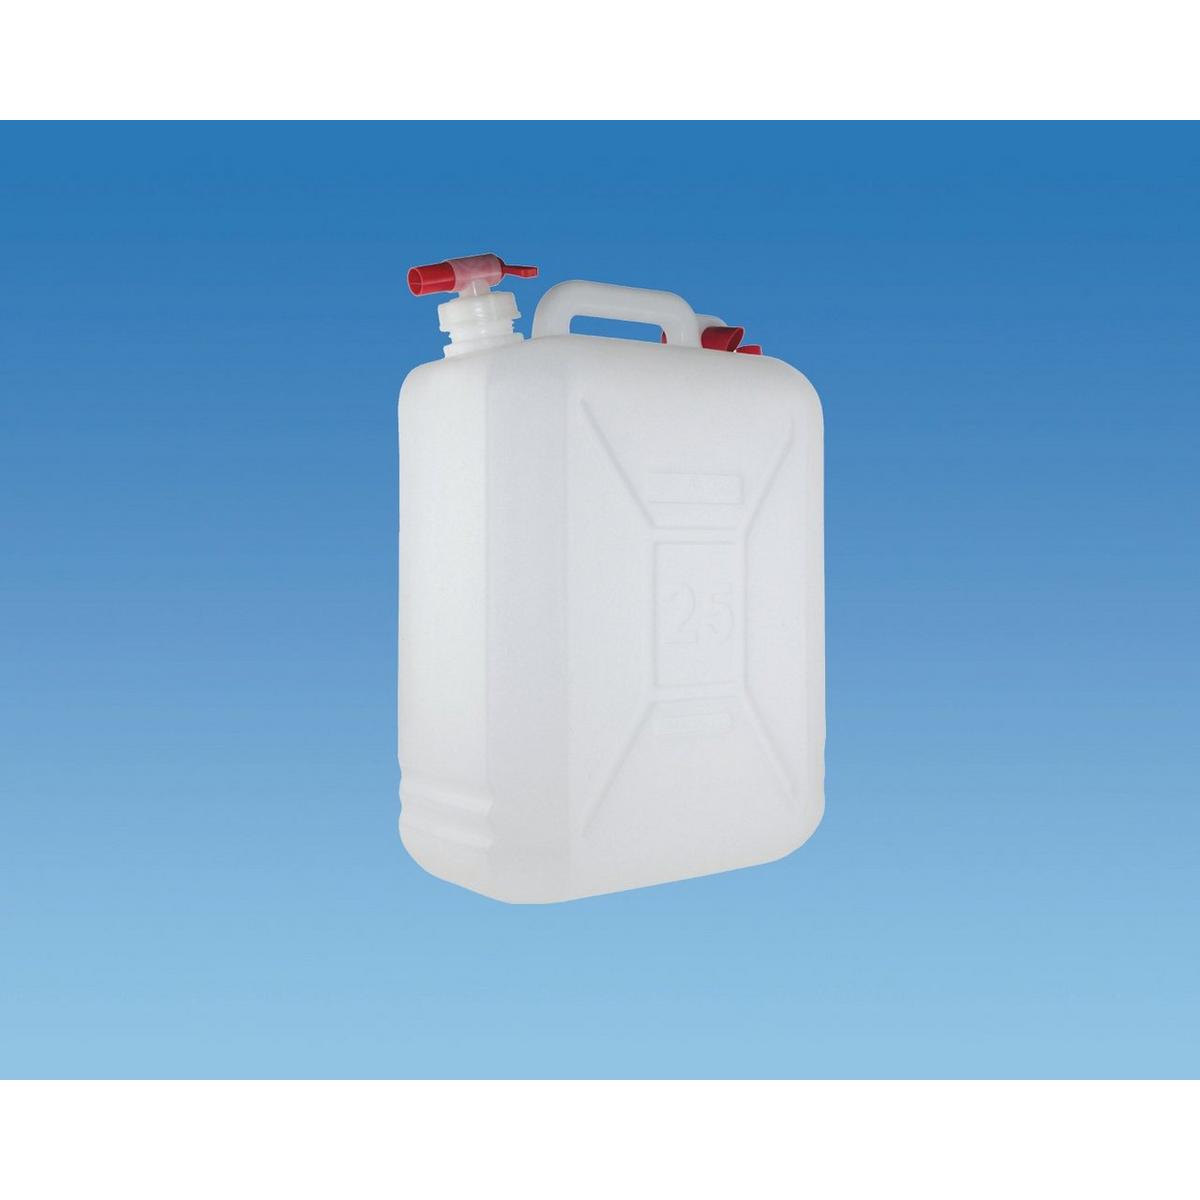 Pennine Leisure Supplies 25L Jerry Can